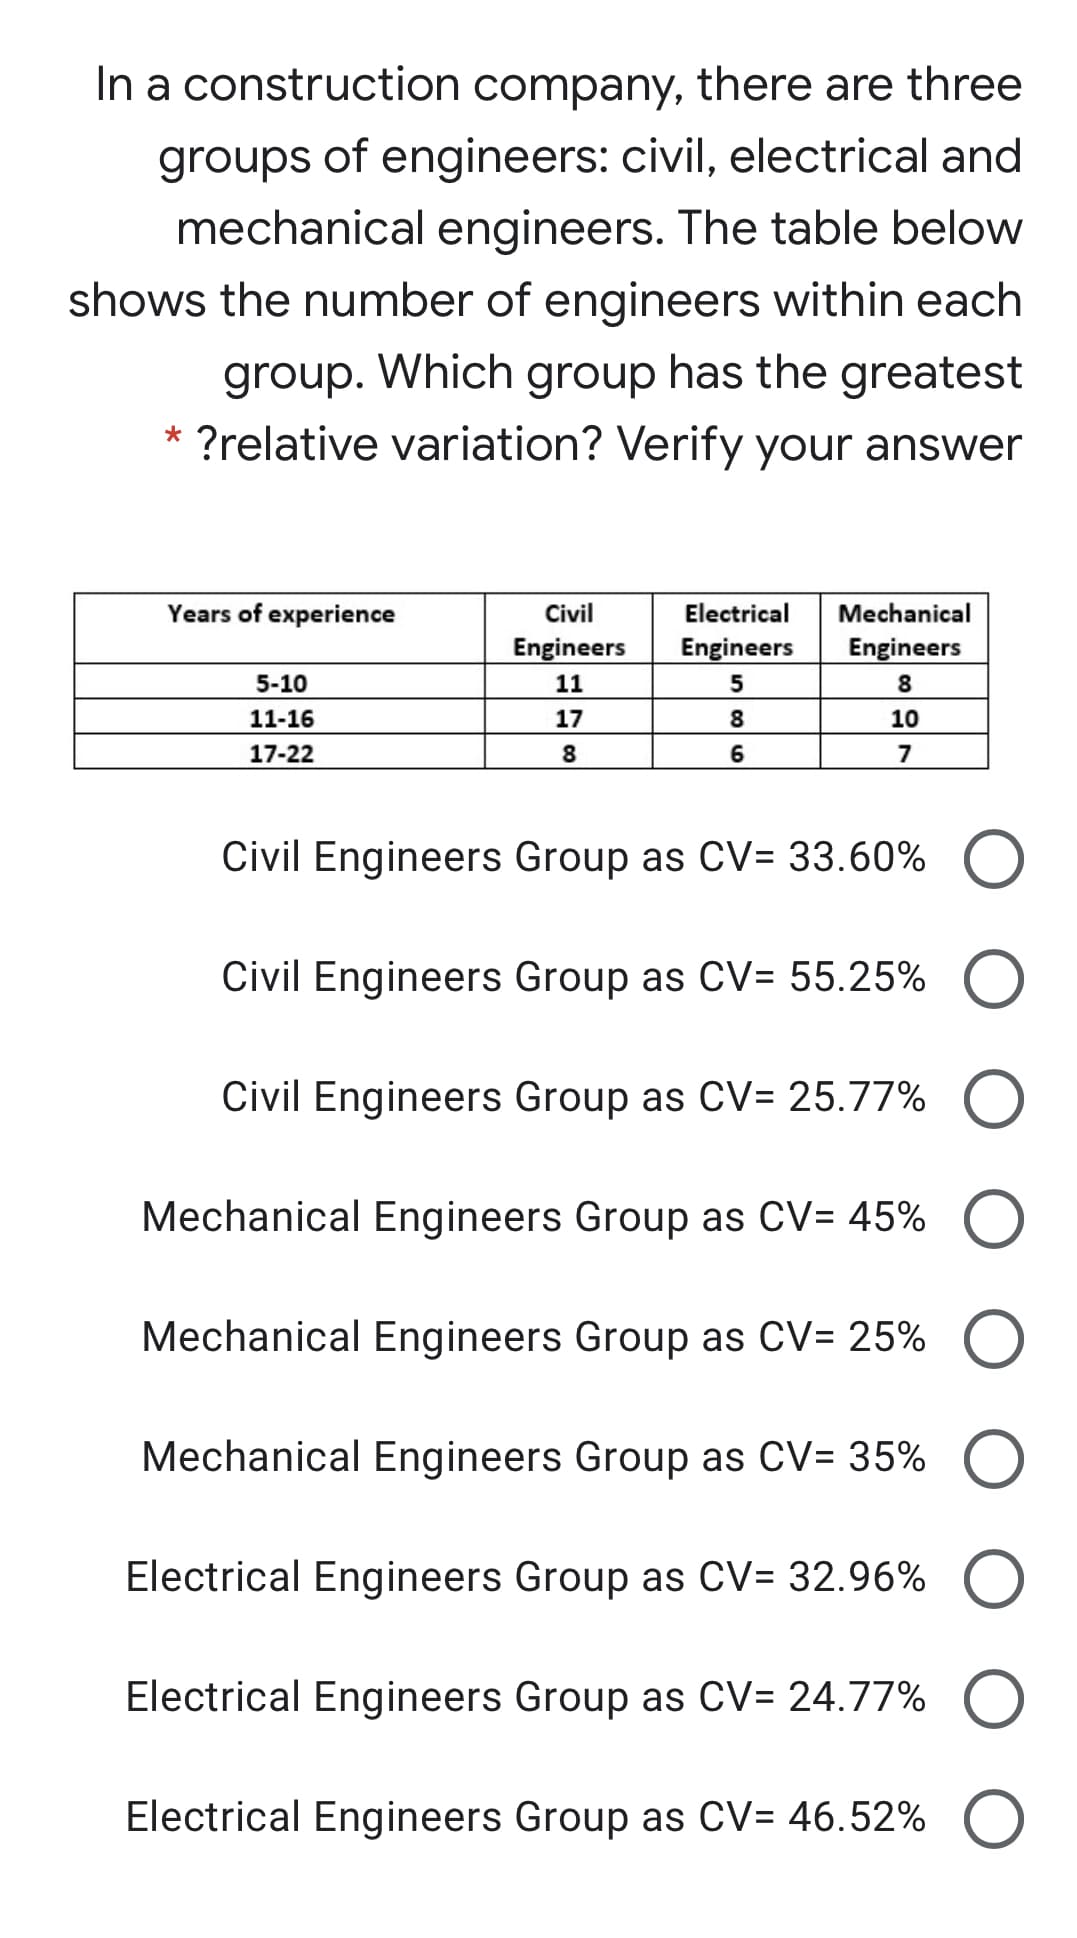 In a construction company, there are three
groups of engineers: civil, electrical and
mechanical engineers. The table below
shows the number of engineers within each
group. Which group has the greatest
?relative variation? Verify your answer
Years of experience
Civil
Electrical
Mechanical
Engineers
Engineers
Engineers
5-10
11
8
11-16
17
10
17-22
8
7
Civil Engineers Group as CV= 33.60%
Civil Engineers Group as CV= 55.25%
Civil Engineers Group as CV= 25.77%
Mechanical Engineers Group as CV= 45%
Mechanical Engineers Group as CV= 25%
Mechanical Engineers Group as CV= 35%
Electrical Engineers Group as CV= 32.96%
Electrical Engineers Group as CV= 24.77%
Electrical Engineers Group as CV= 46.52%
